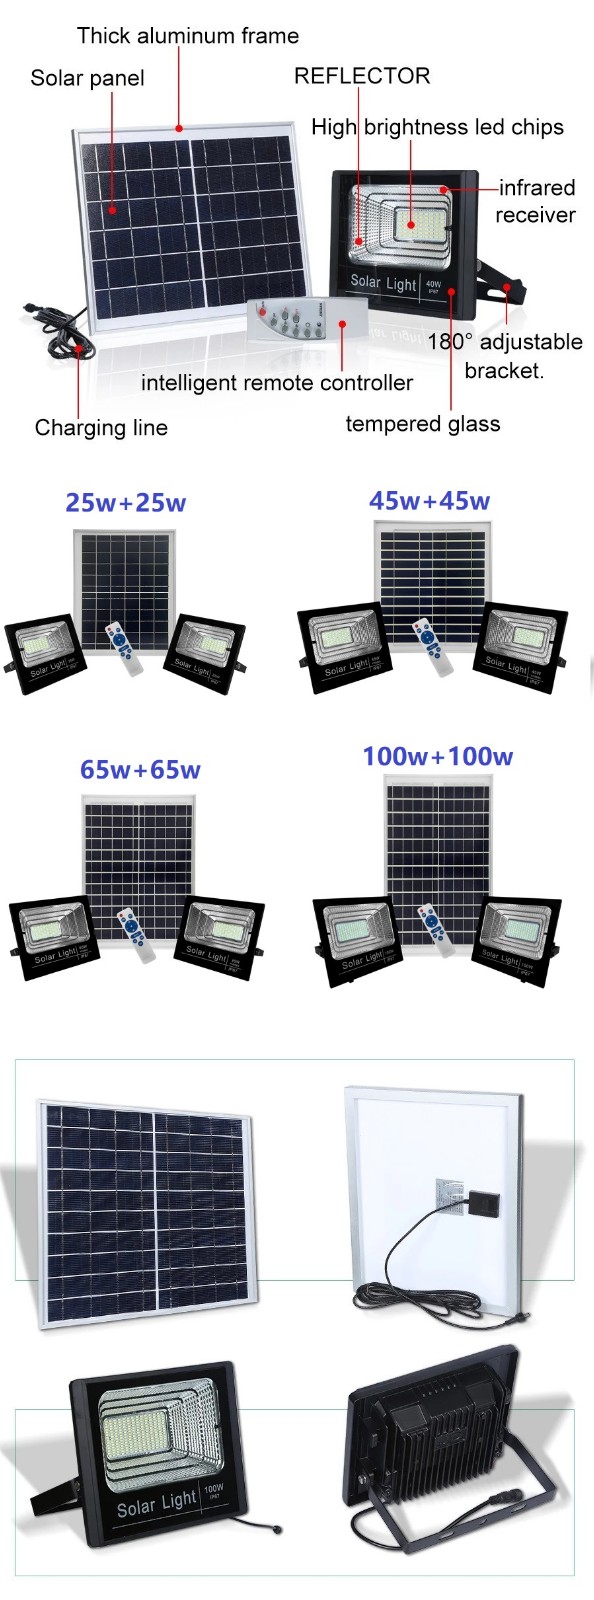 IP67 100lm/w Aluminum Alloy Remote-controlled timer switch 1 driving 2 solar flood light-4